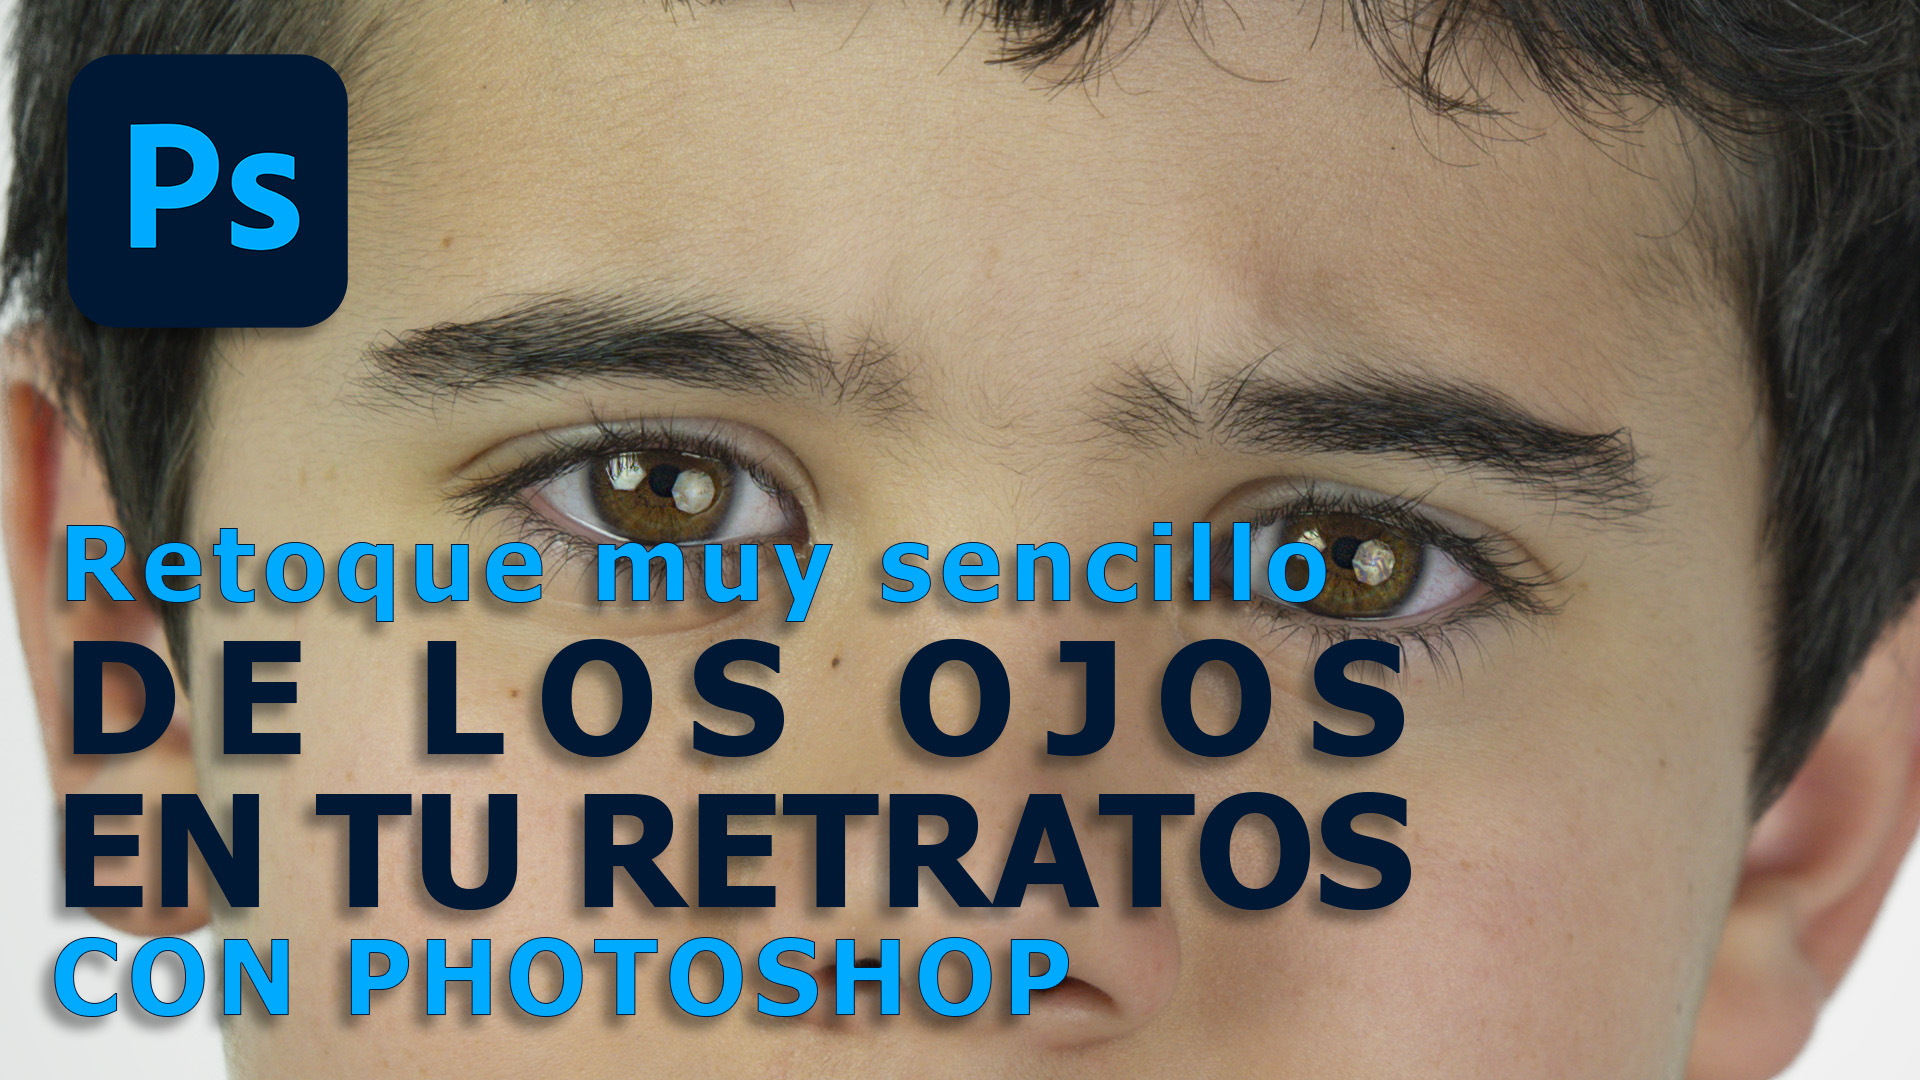 Improve the eyes of portraits with photoshop